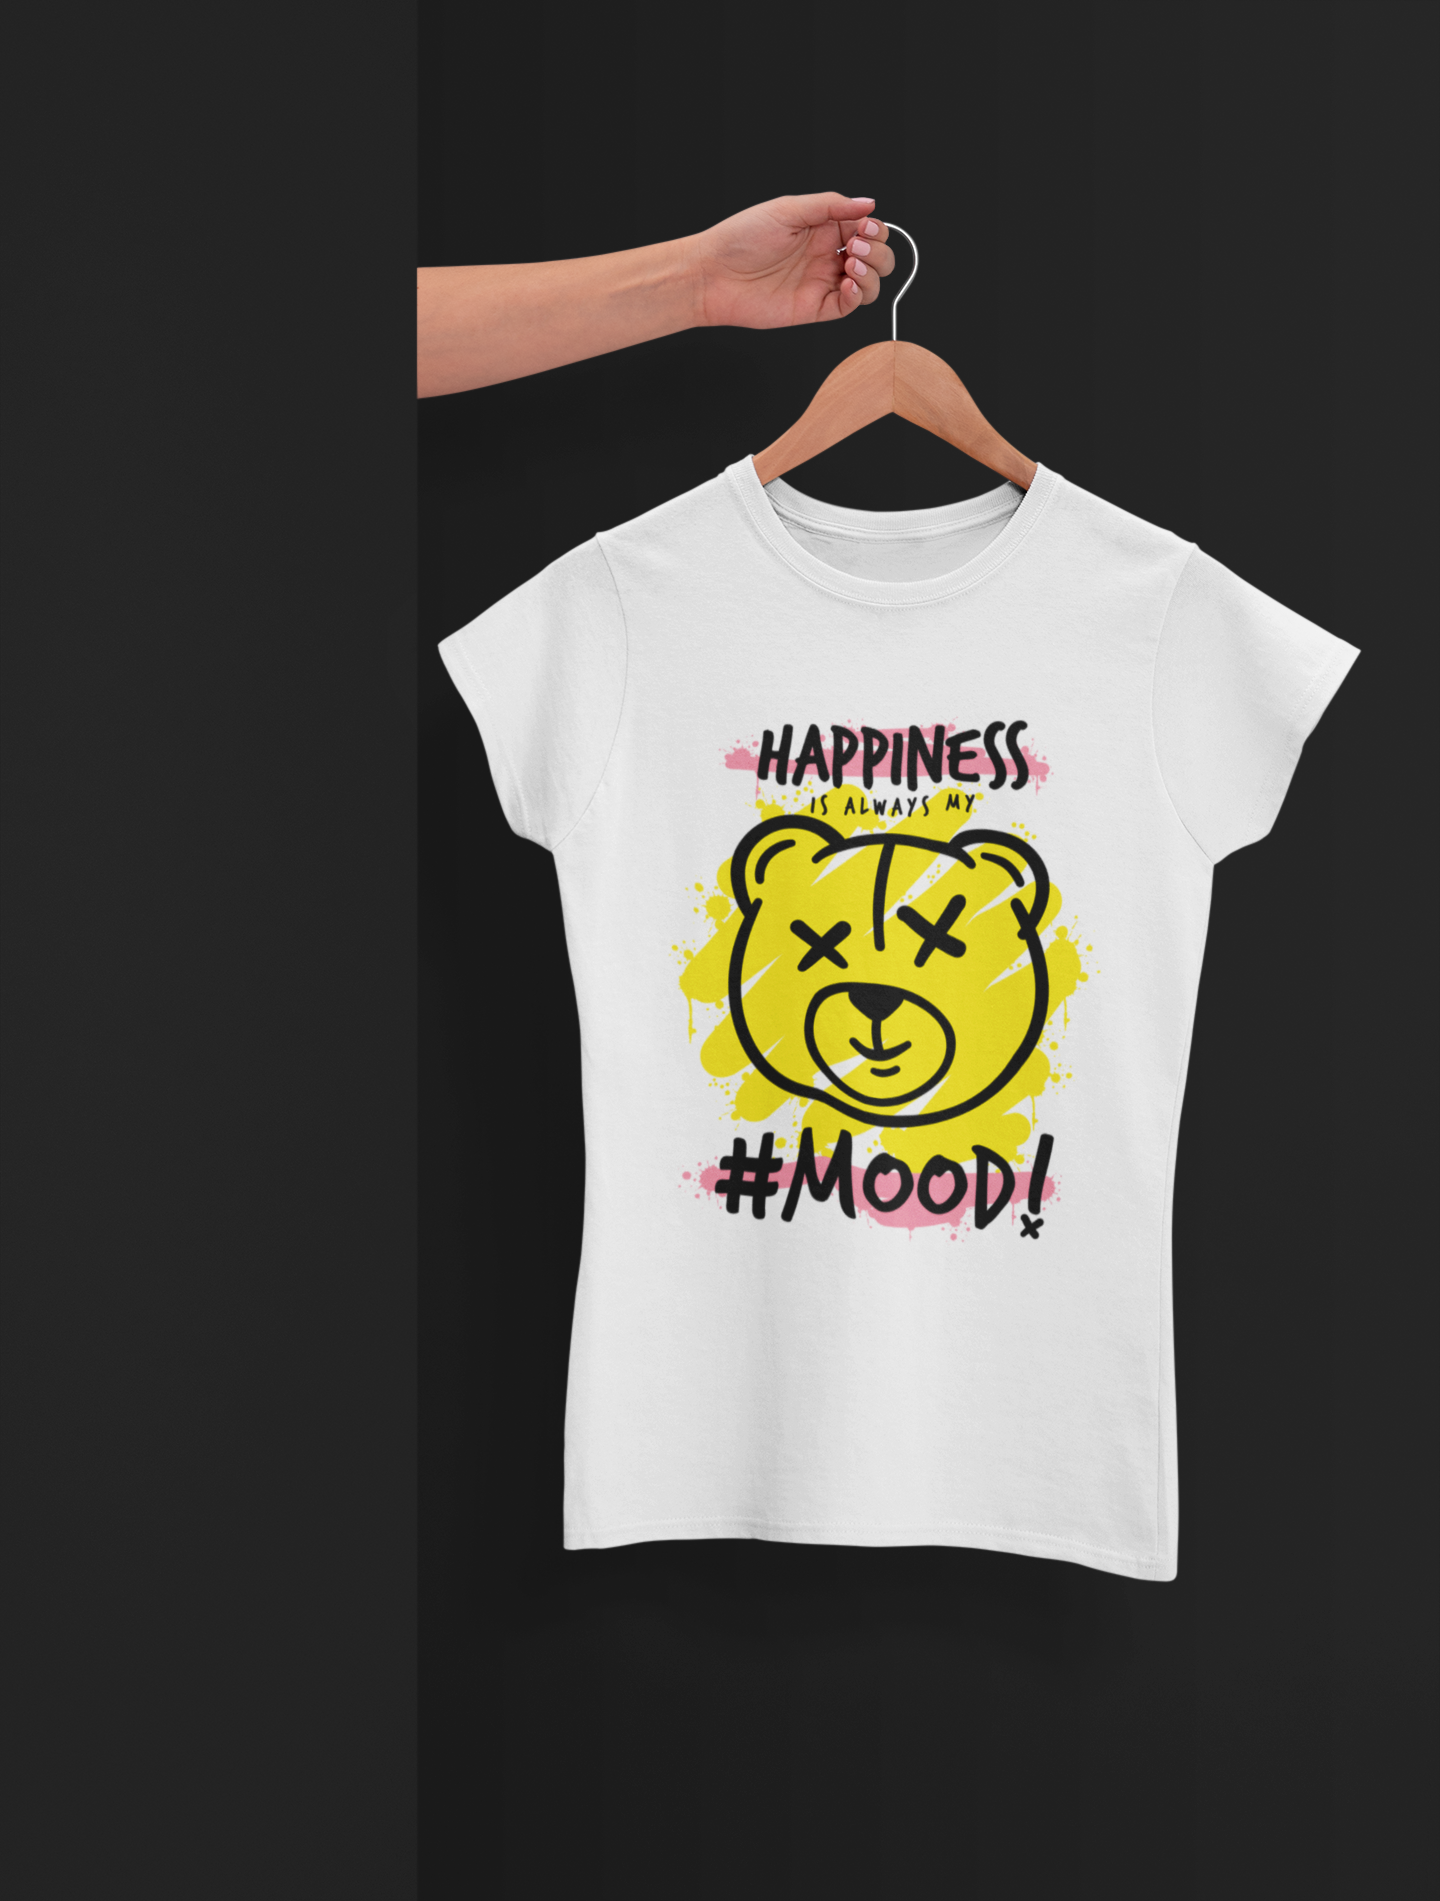 Happiness Mood White T-Shirt For Women